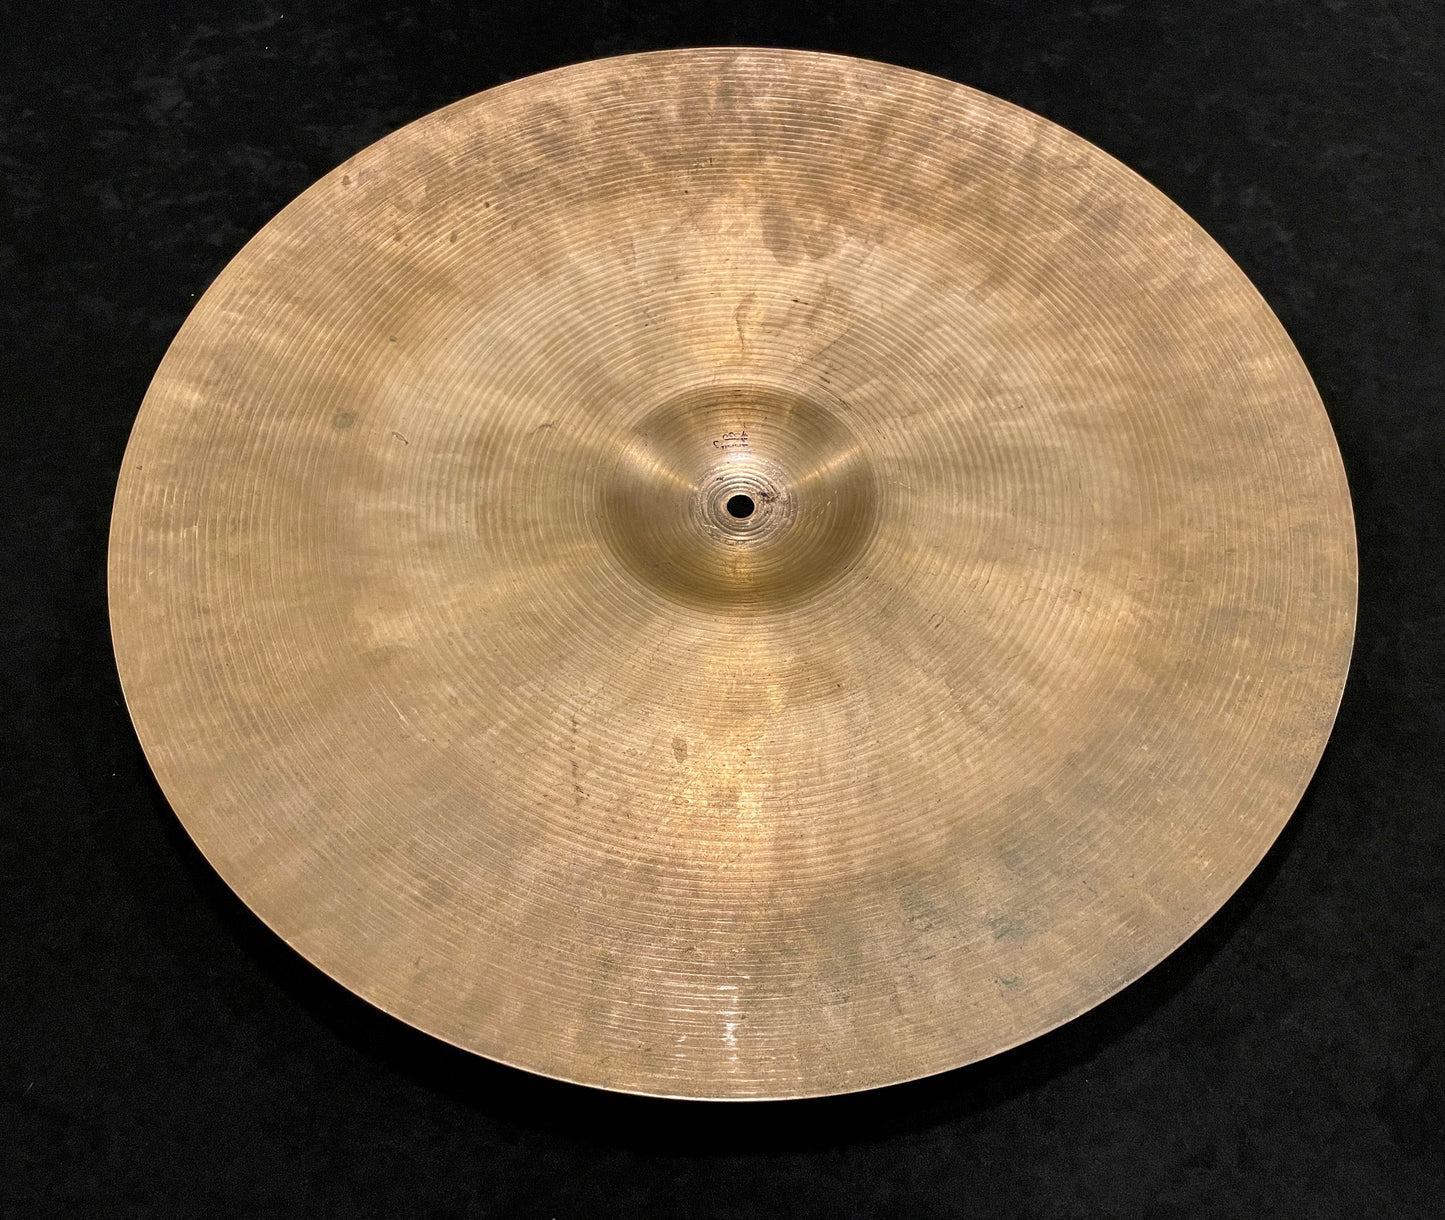 20" Paiste Pre-Serial Number Formula 602 Ride Cymbal 2004g #701 *Sound File*